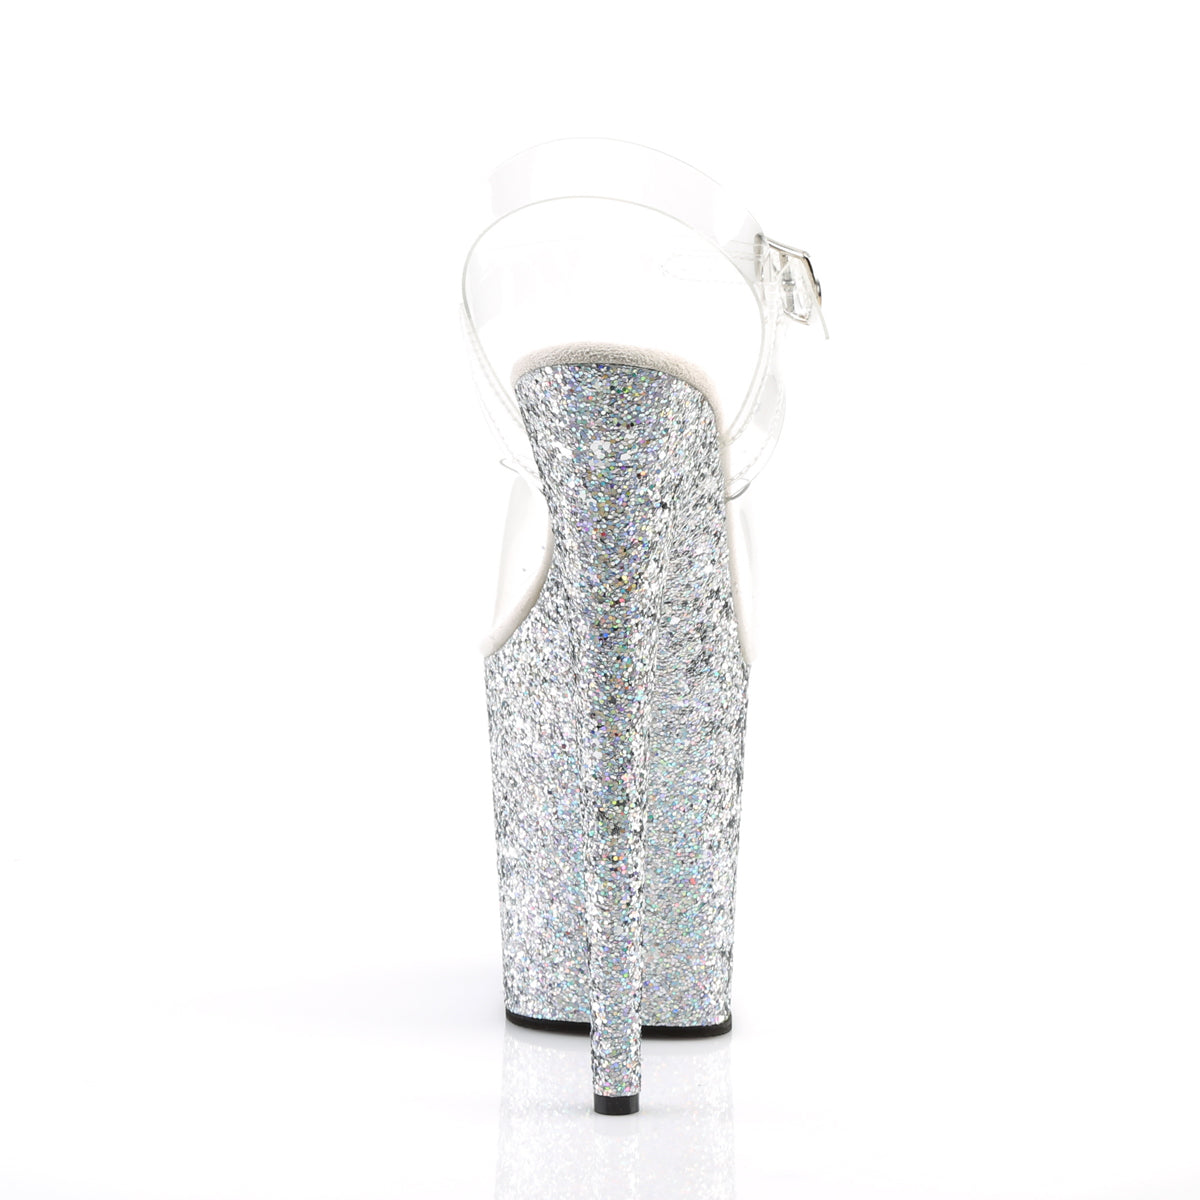 FLAMINGO-808LG Pleaser Clear/Silver Multi Glitter Platform Shoes [Exotic Dancing Shoes]